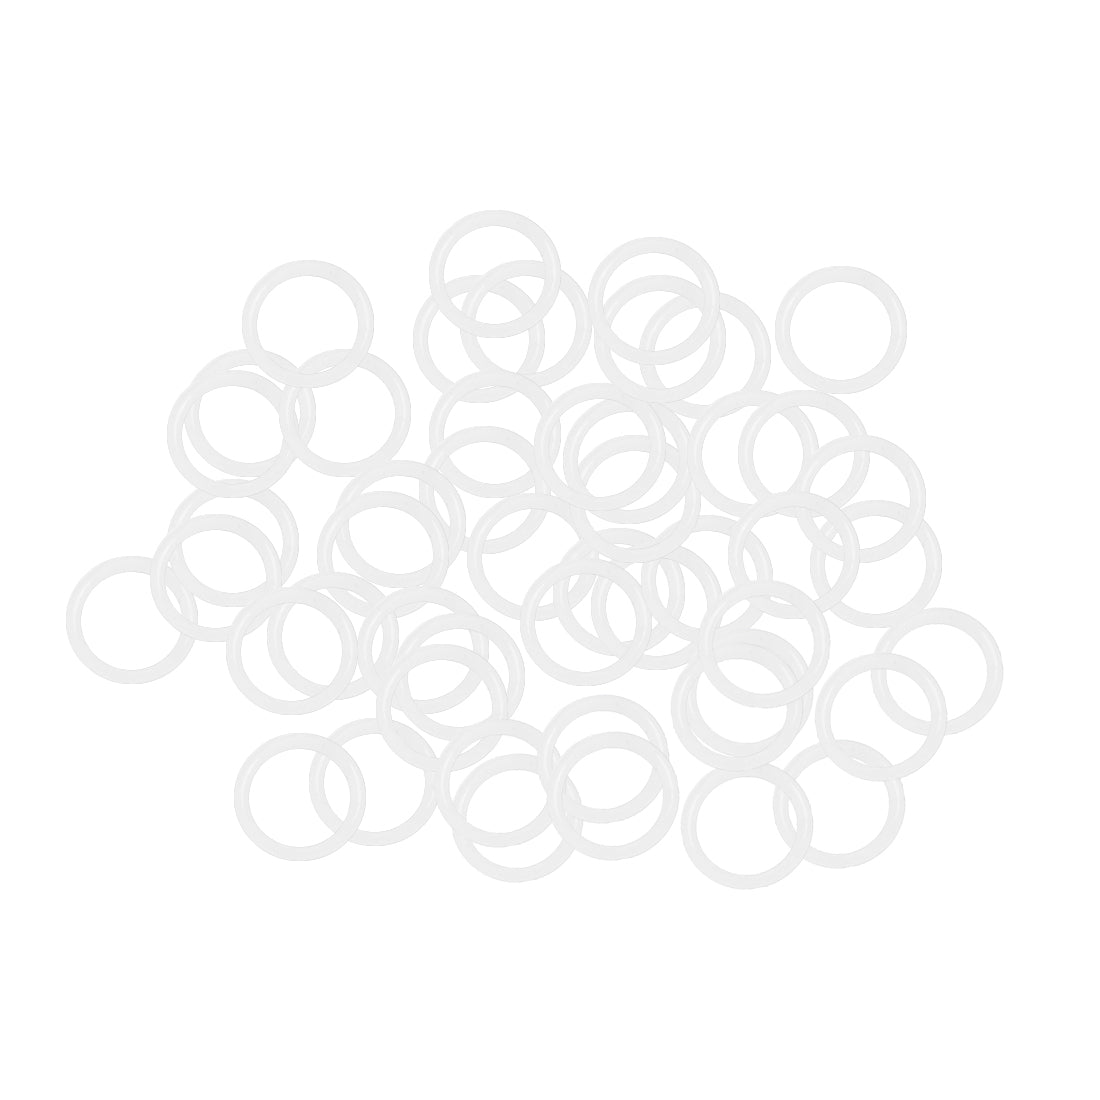 uxcell Uxcell Silicone O-Rings 20mm OD, 15.2mm ID, 2.4mm Width, Seal Gasket White 50Pcs